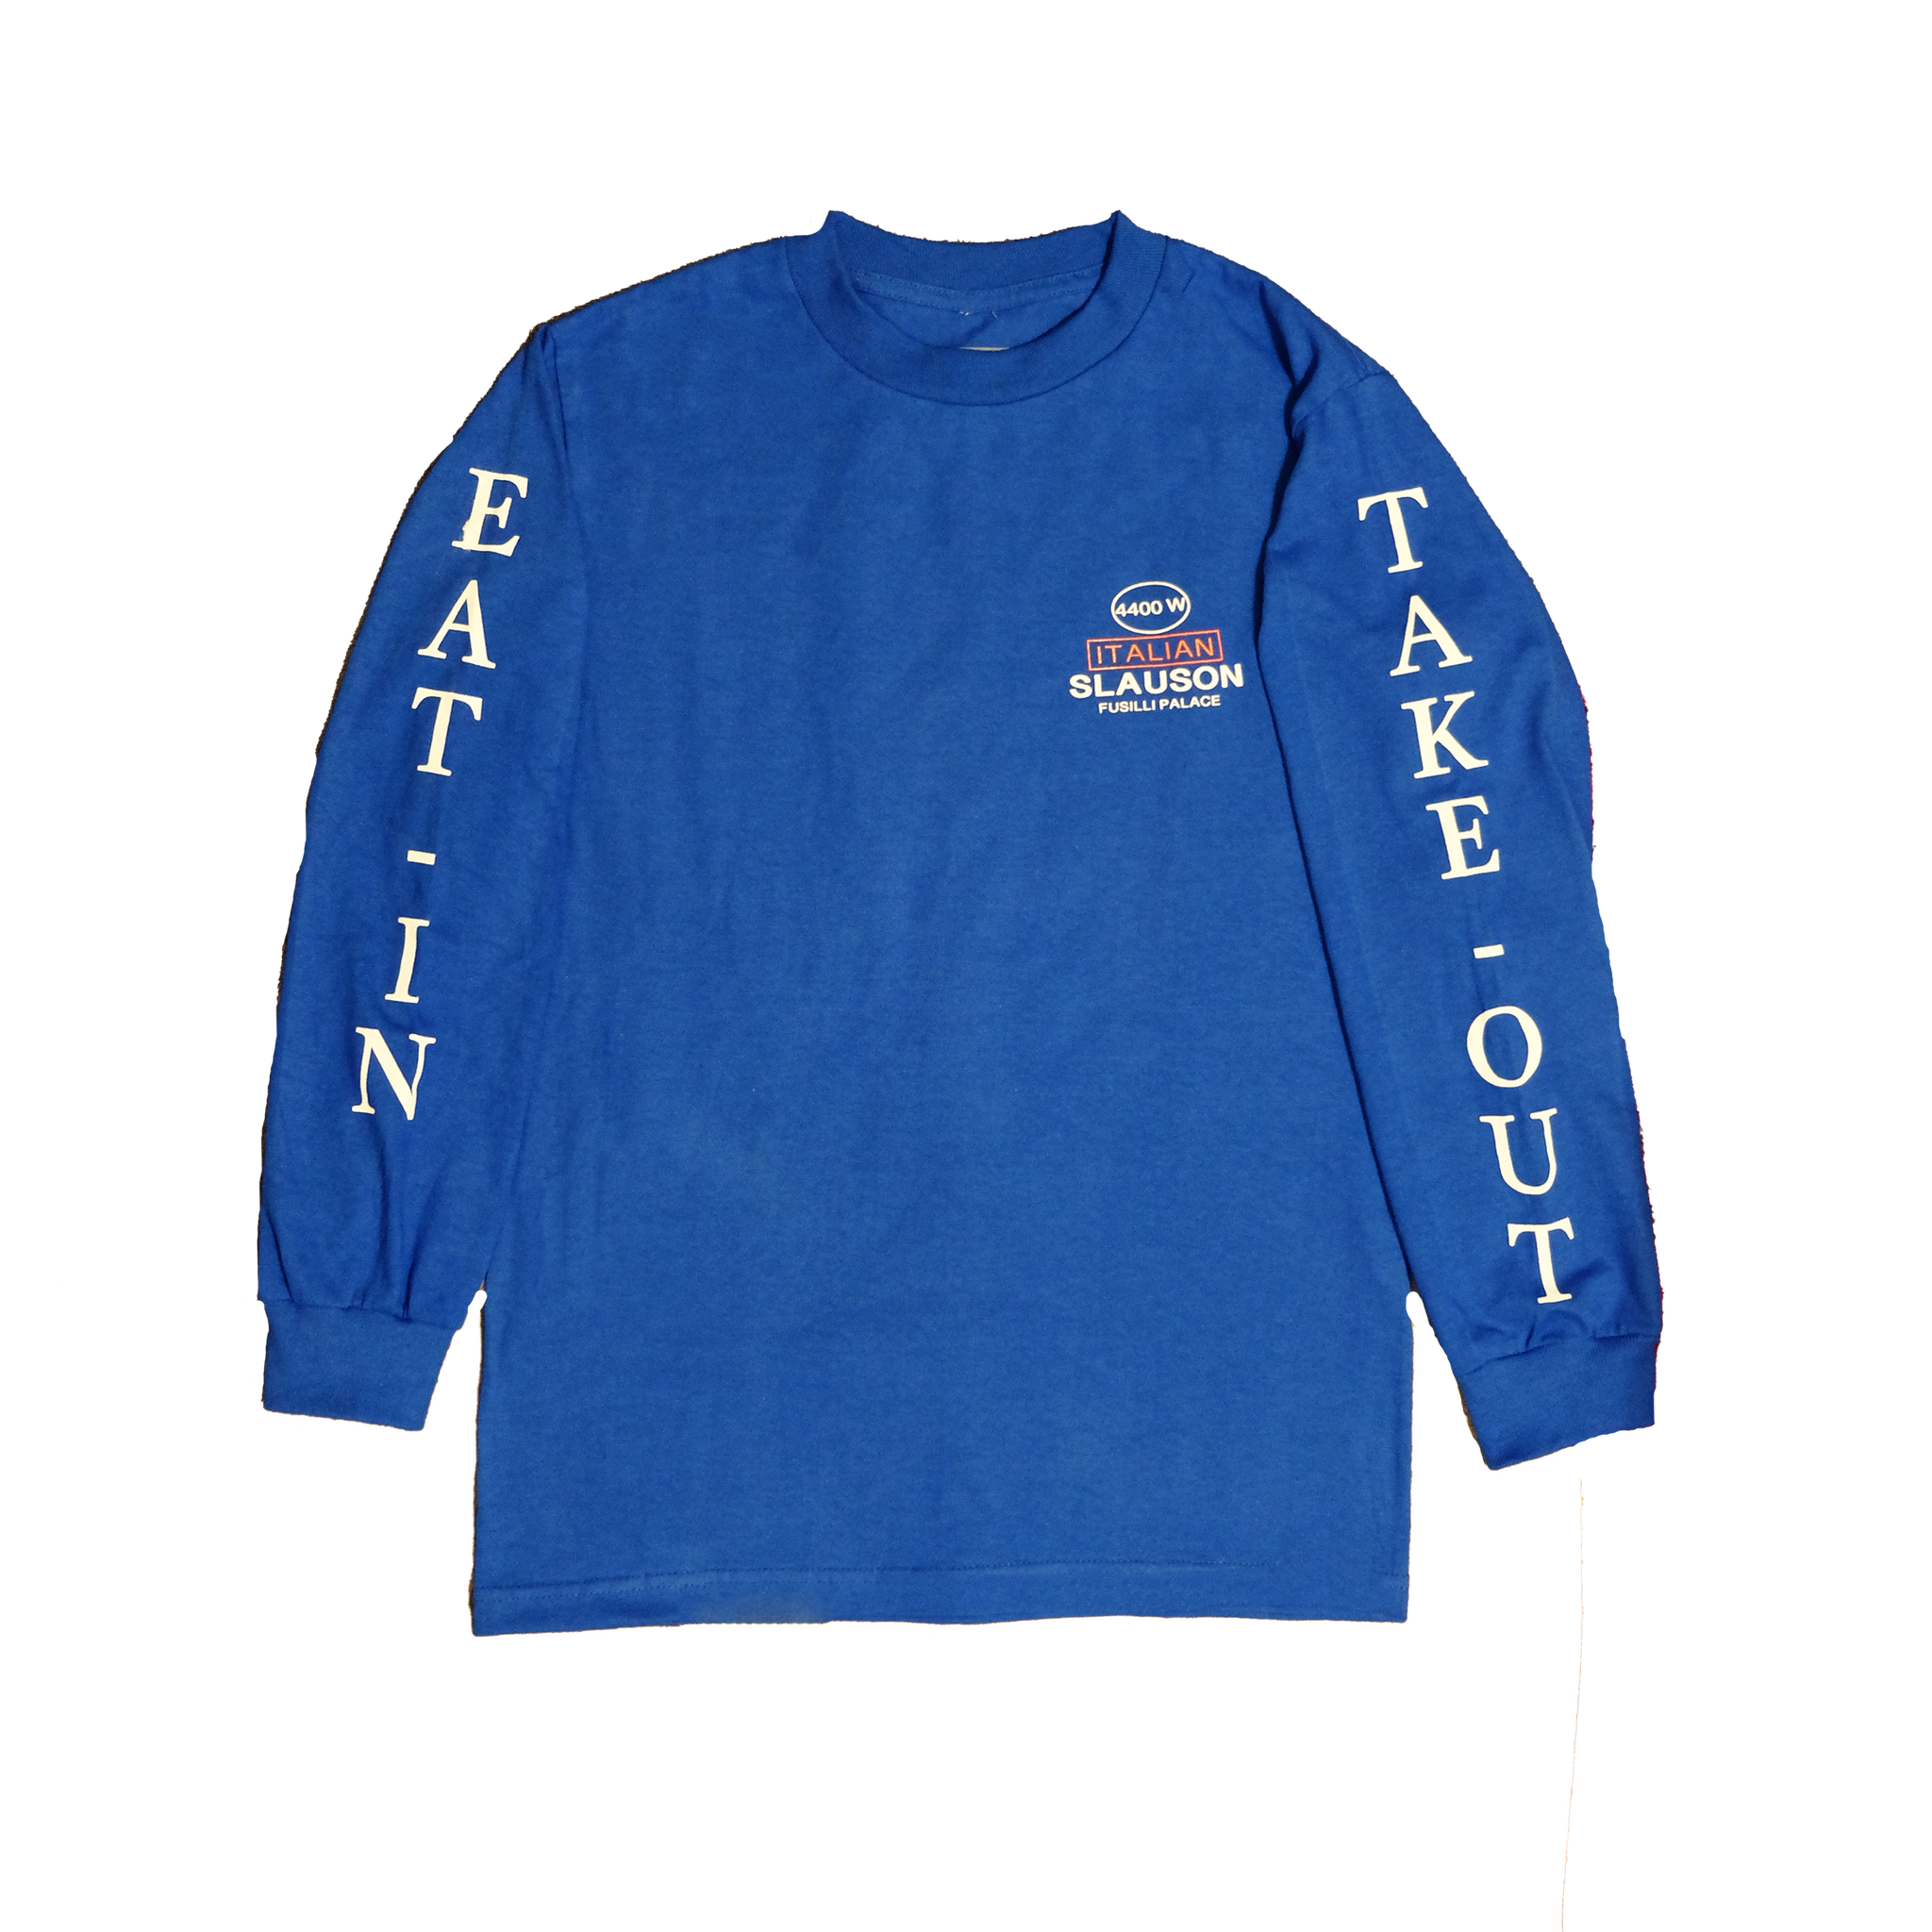 Eat In, Take Out Slauson Long Sleeve | Jon and Vinny's Merch